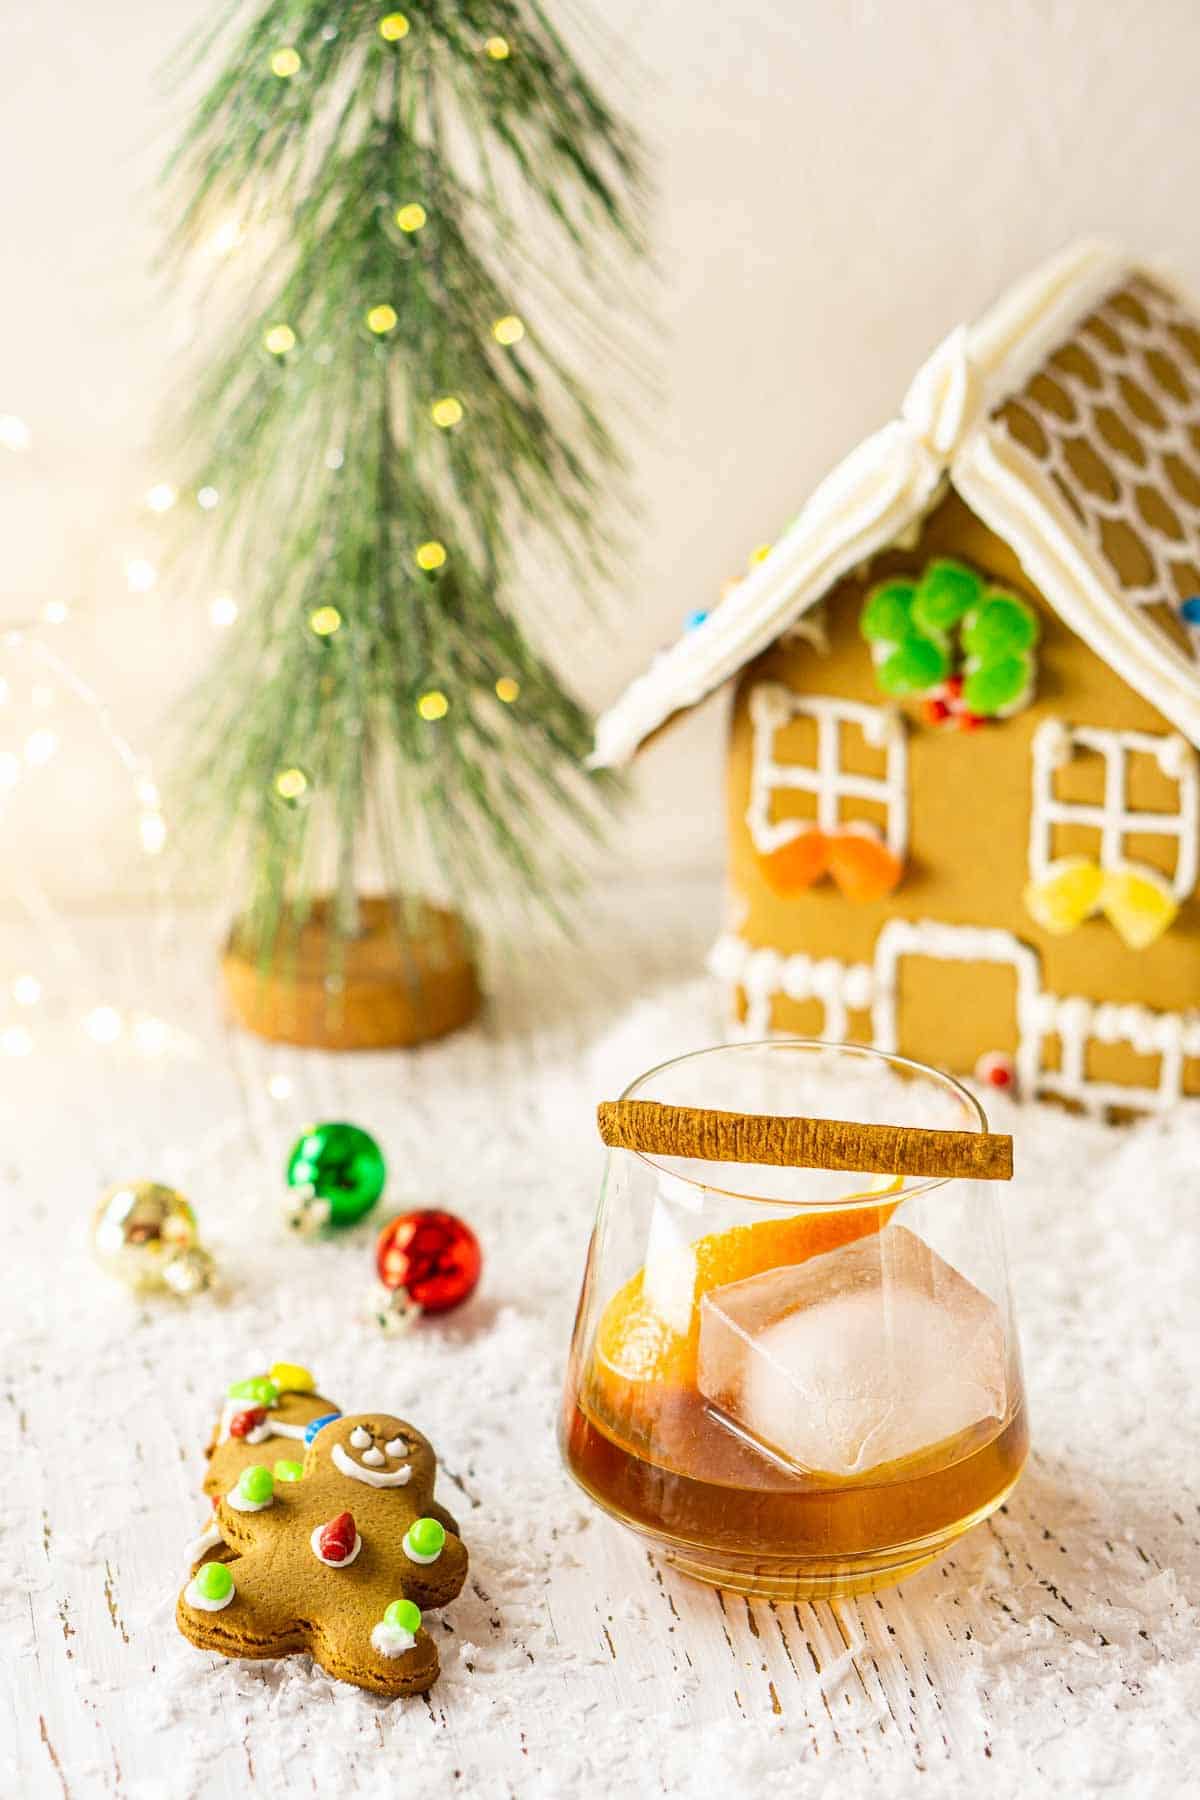 Looking down at a gingerbread old fashioned with Christmas decor and lights around it on fake snow.